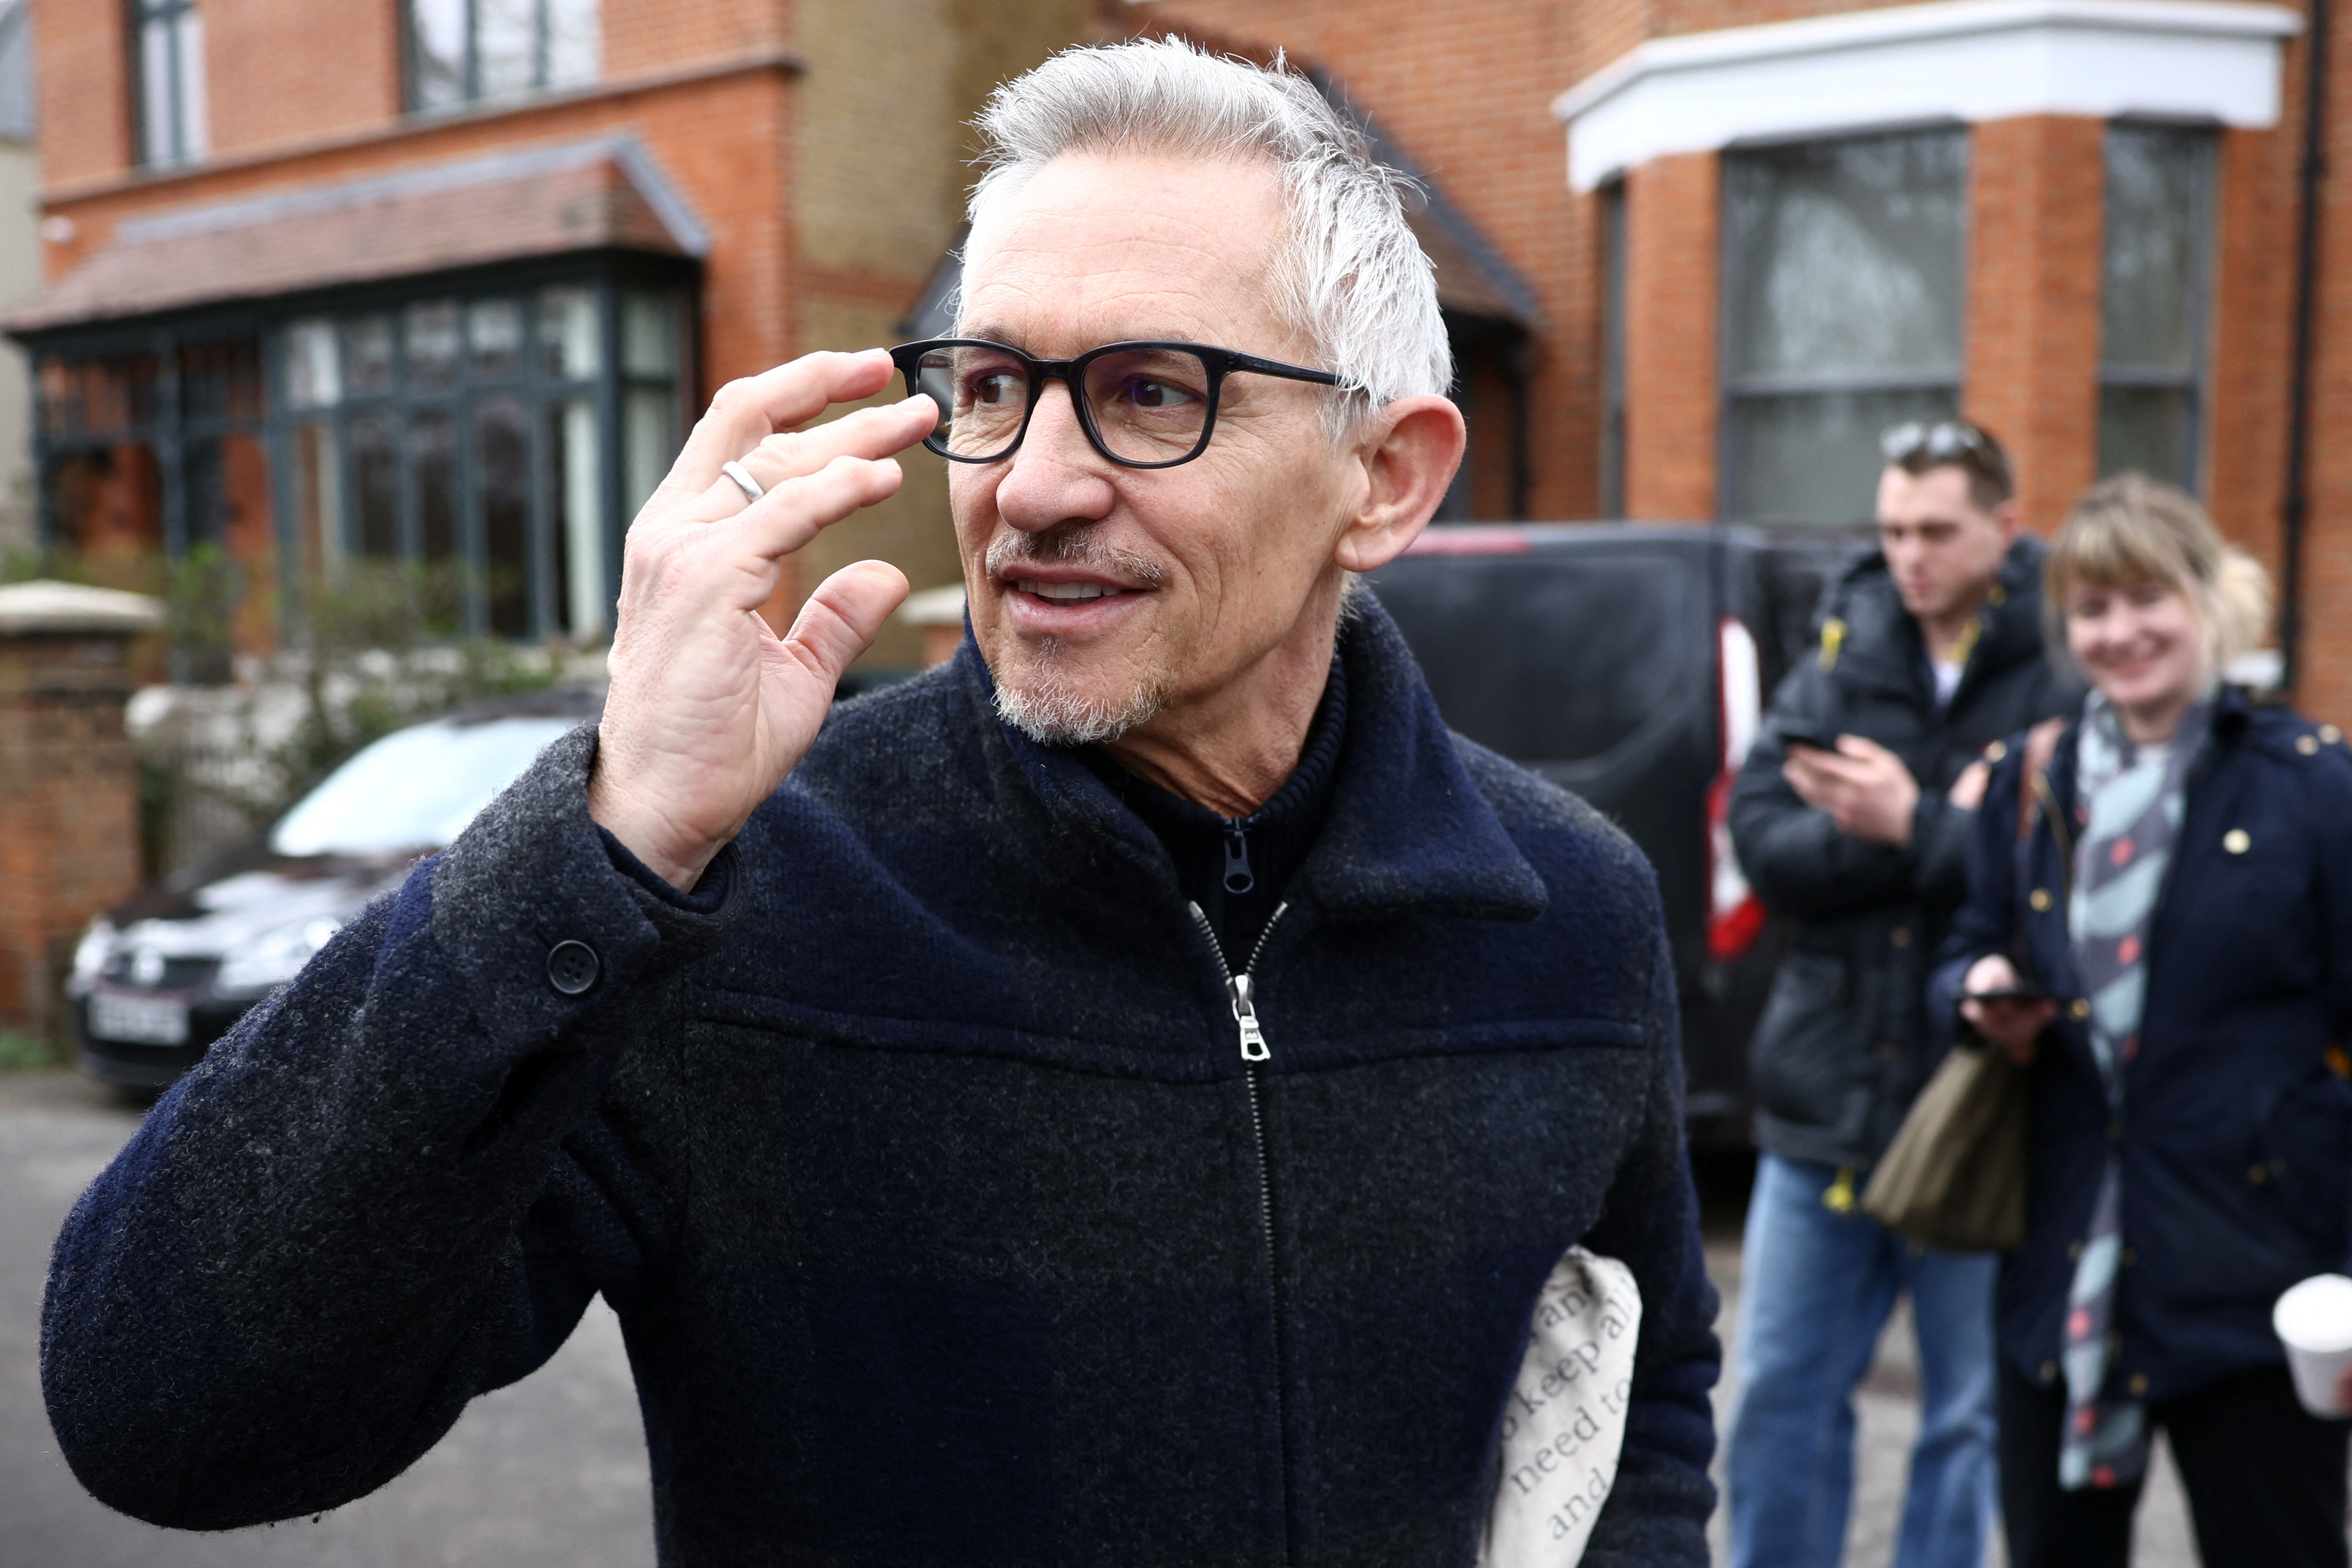 Former British football player and BBC presenter Gary Lineker walks outsside his home in London